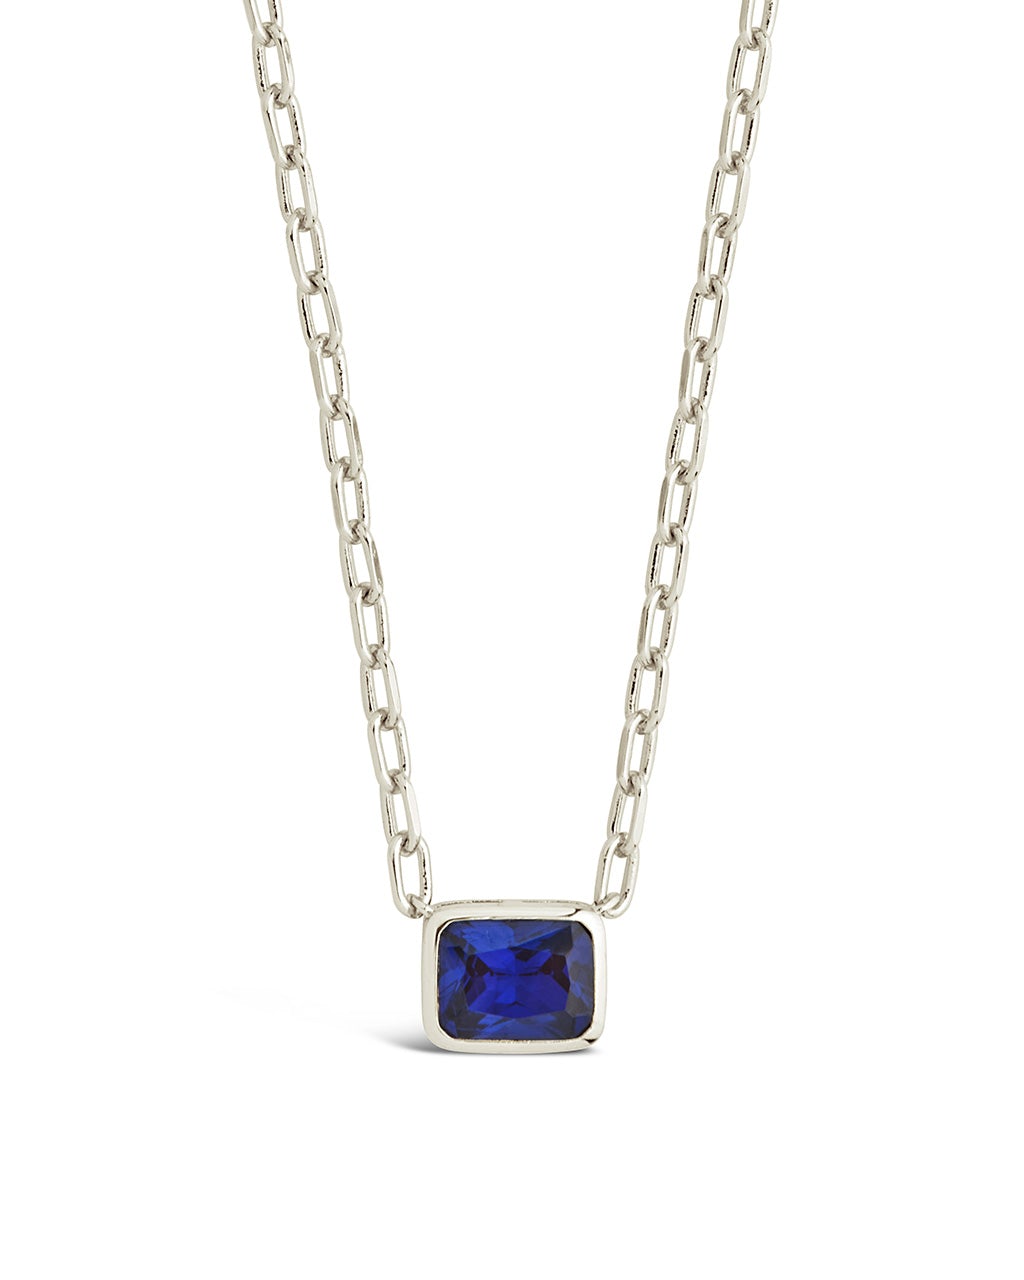 Sapphire Cushion-Cut Bezel Pendant Necklace Necklace Sterling Forever Silver 